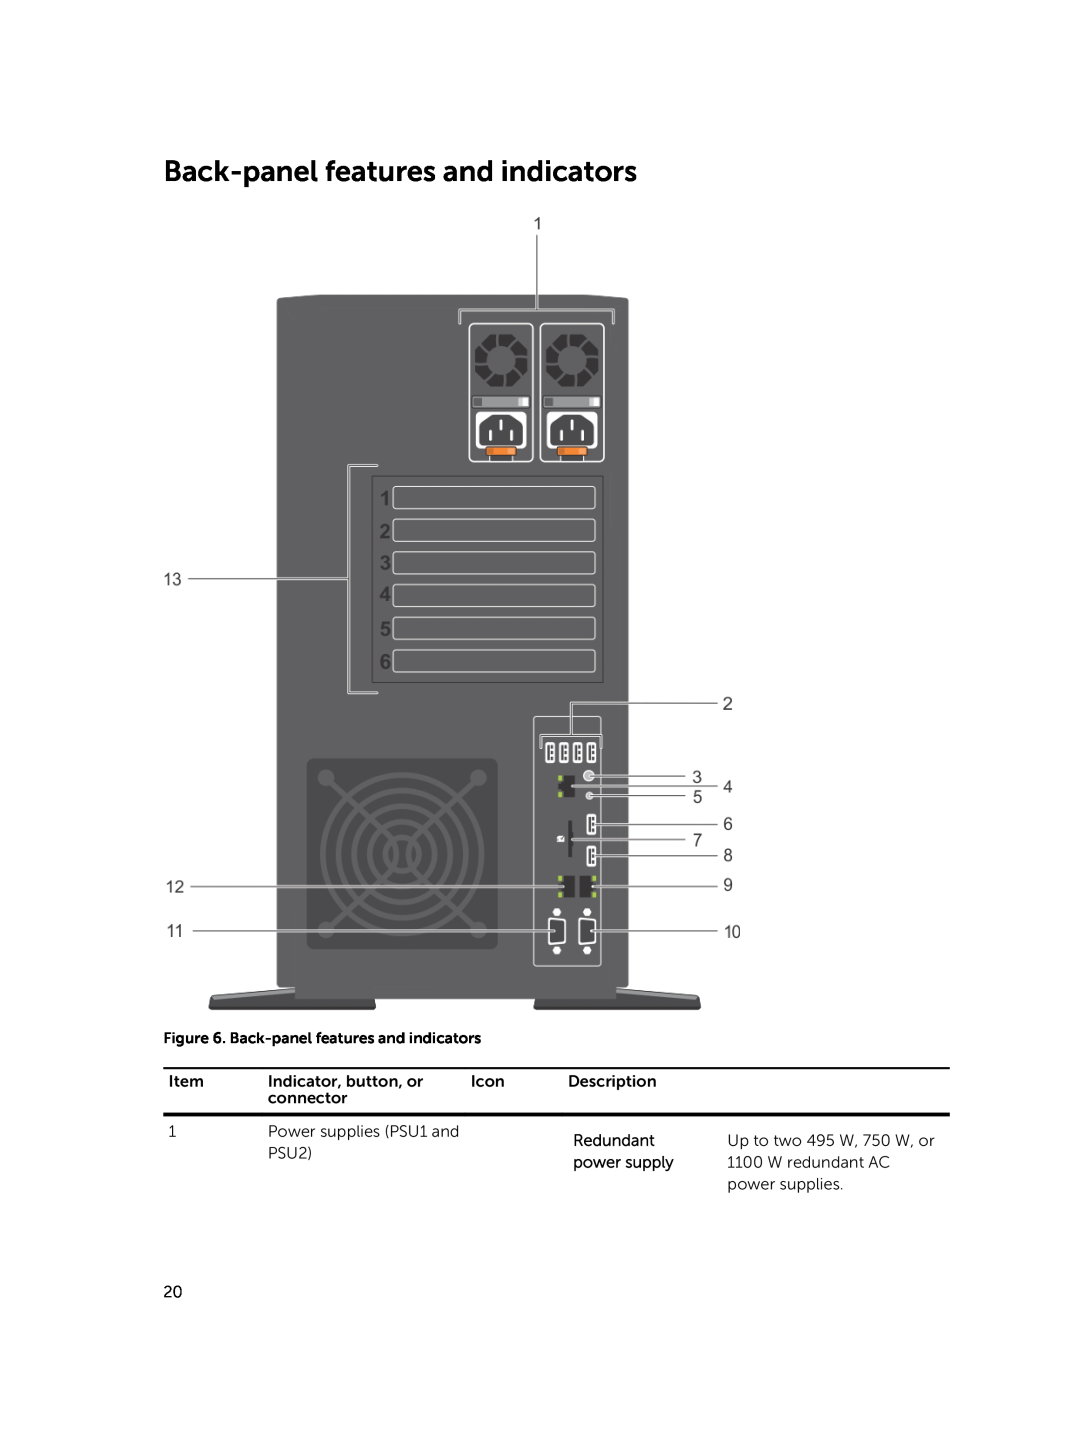 Dell E30S owner manual Back-panel features and indicators, Redundant, power supply 